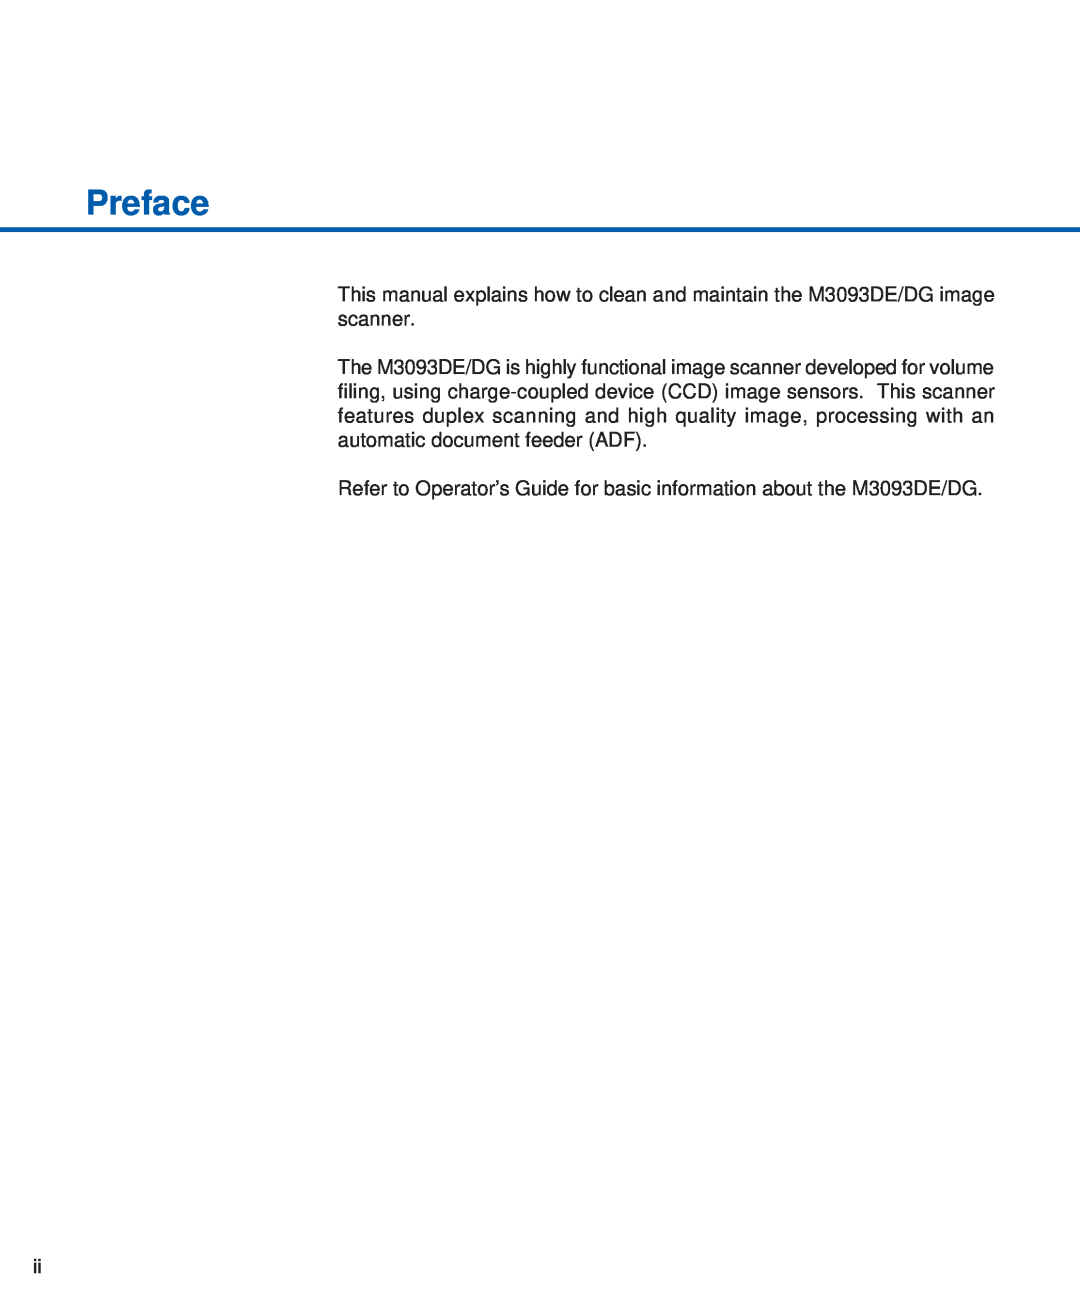 Fujitsu manual Preface, Refer to Operator’s Guide for basic information about the M3093DE/DG 